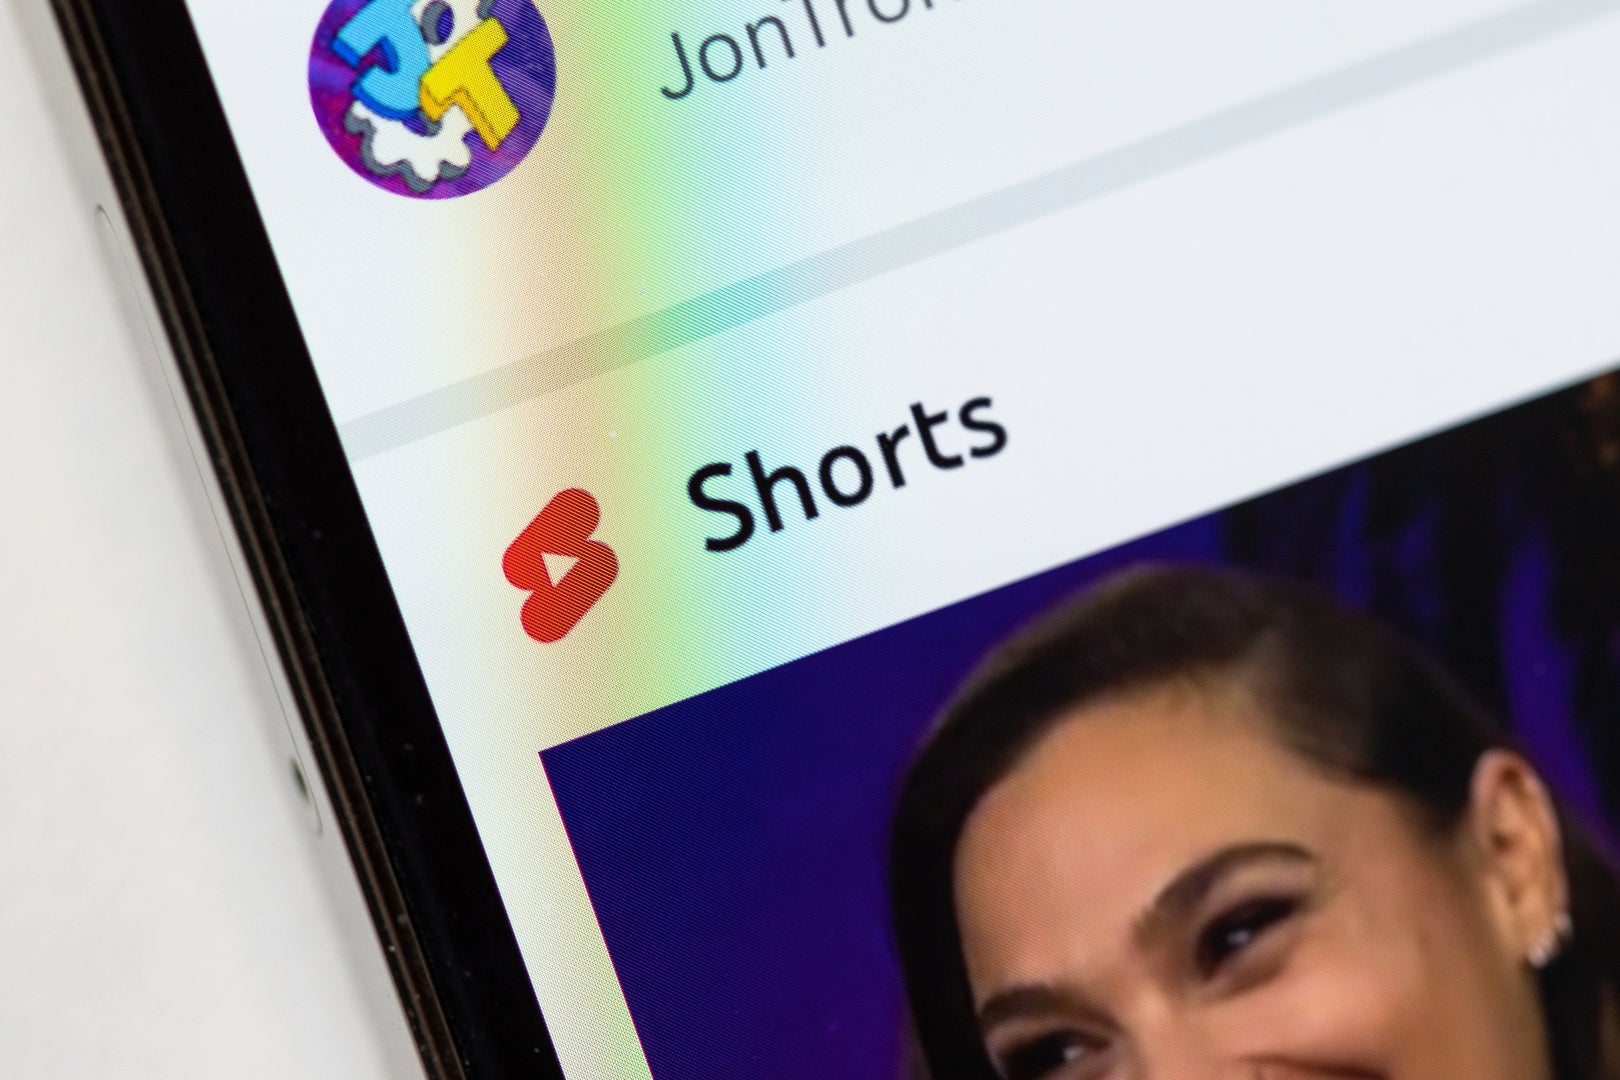 In 2020, YouTube jumped into the short-form video game with Shorts to compete with TikTok and Instagram | Image credit – PhoneArena - YouTube tests new features to help you find, watch, and engage